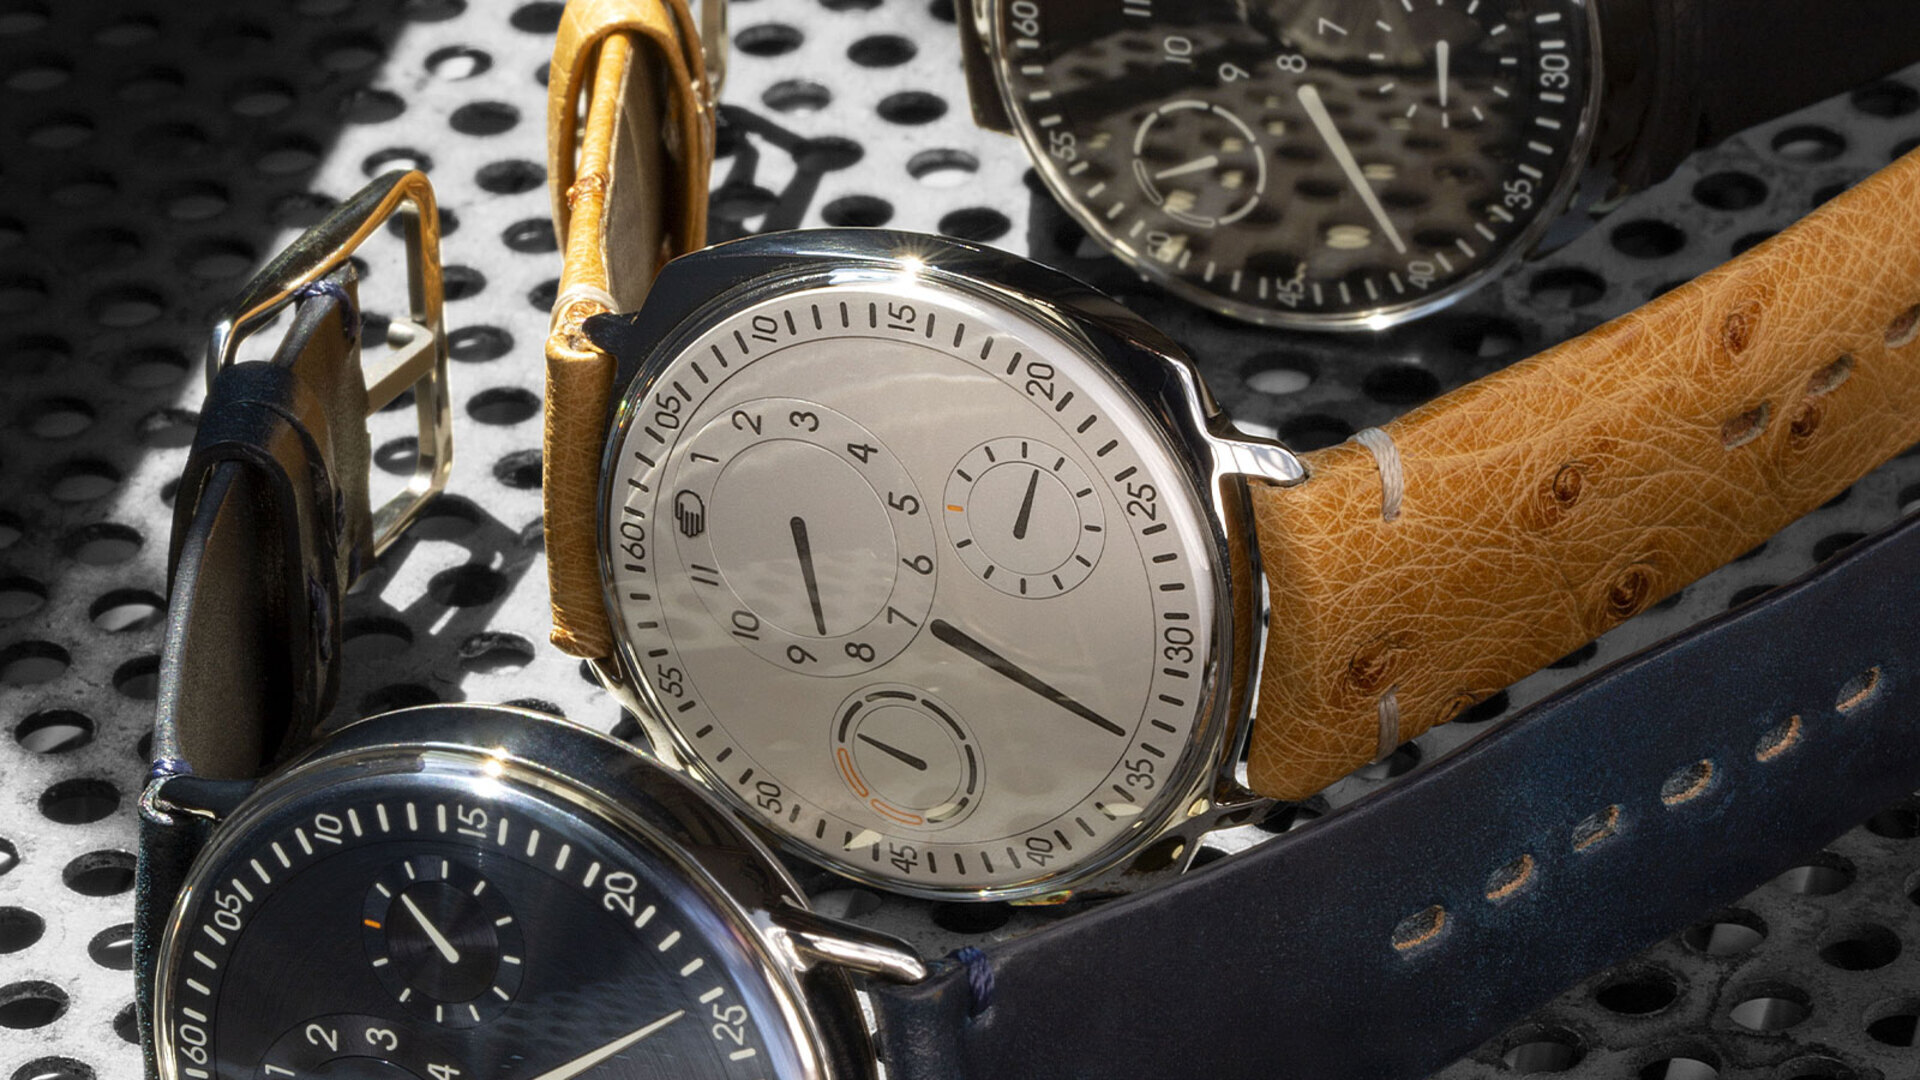 Ressence Type 1 – The Three faces of purity